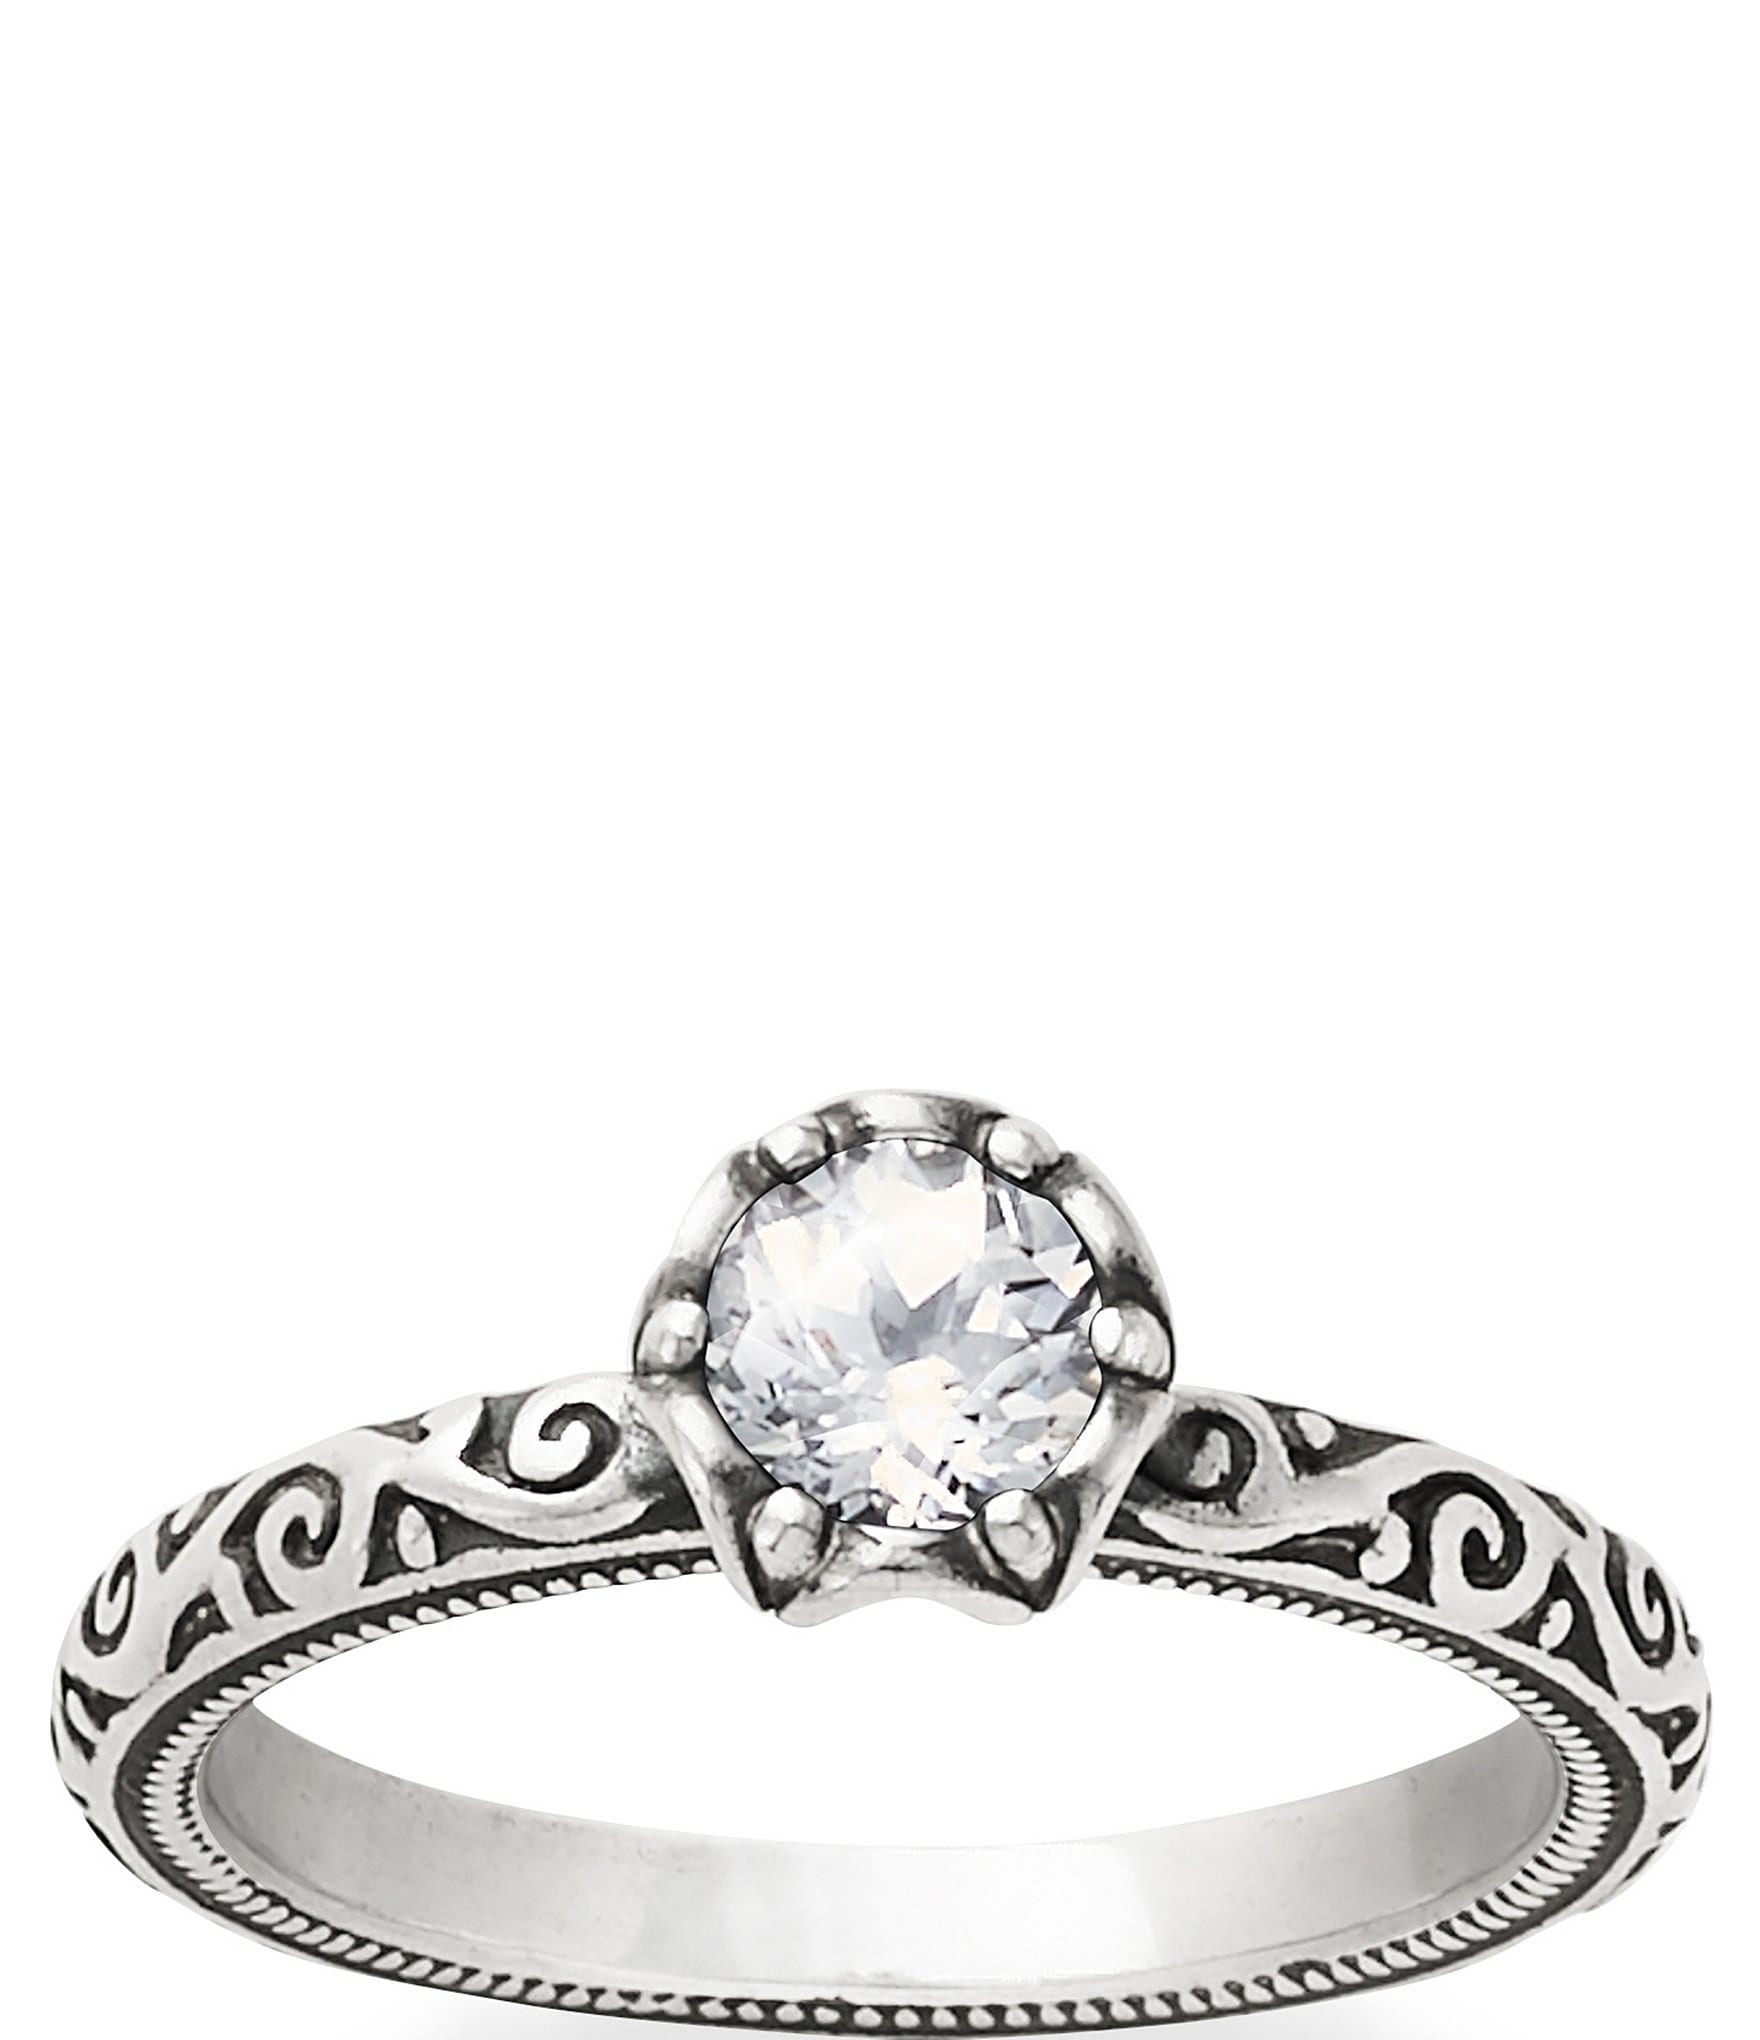 Tia Sterling Silver Band Ring in White Sapphire